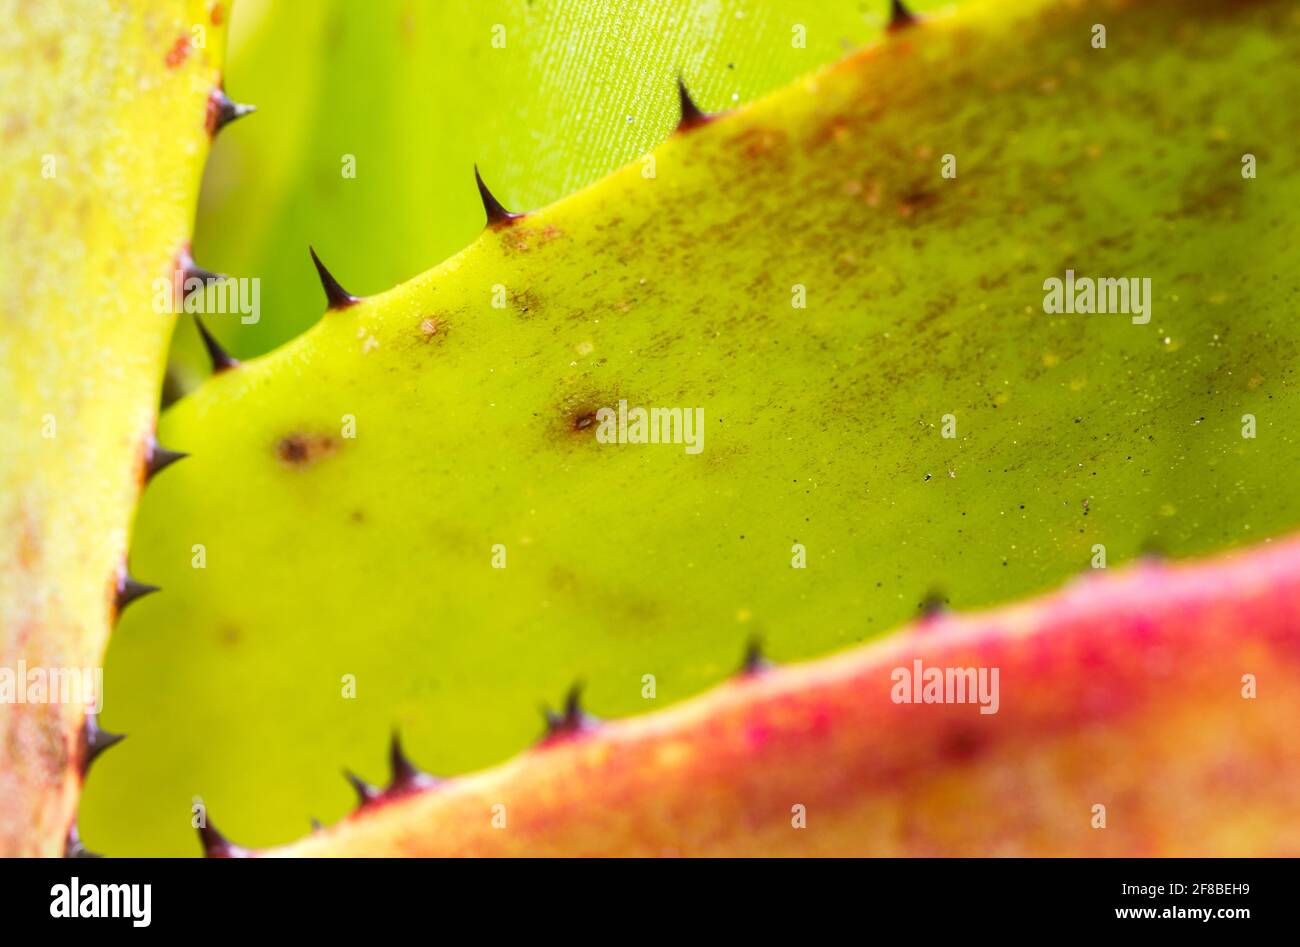 Selective focus shot of spiky thorns on the leaves of a bromeliad plant Stock Photo